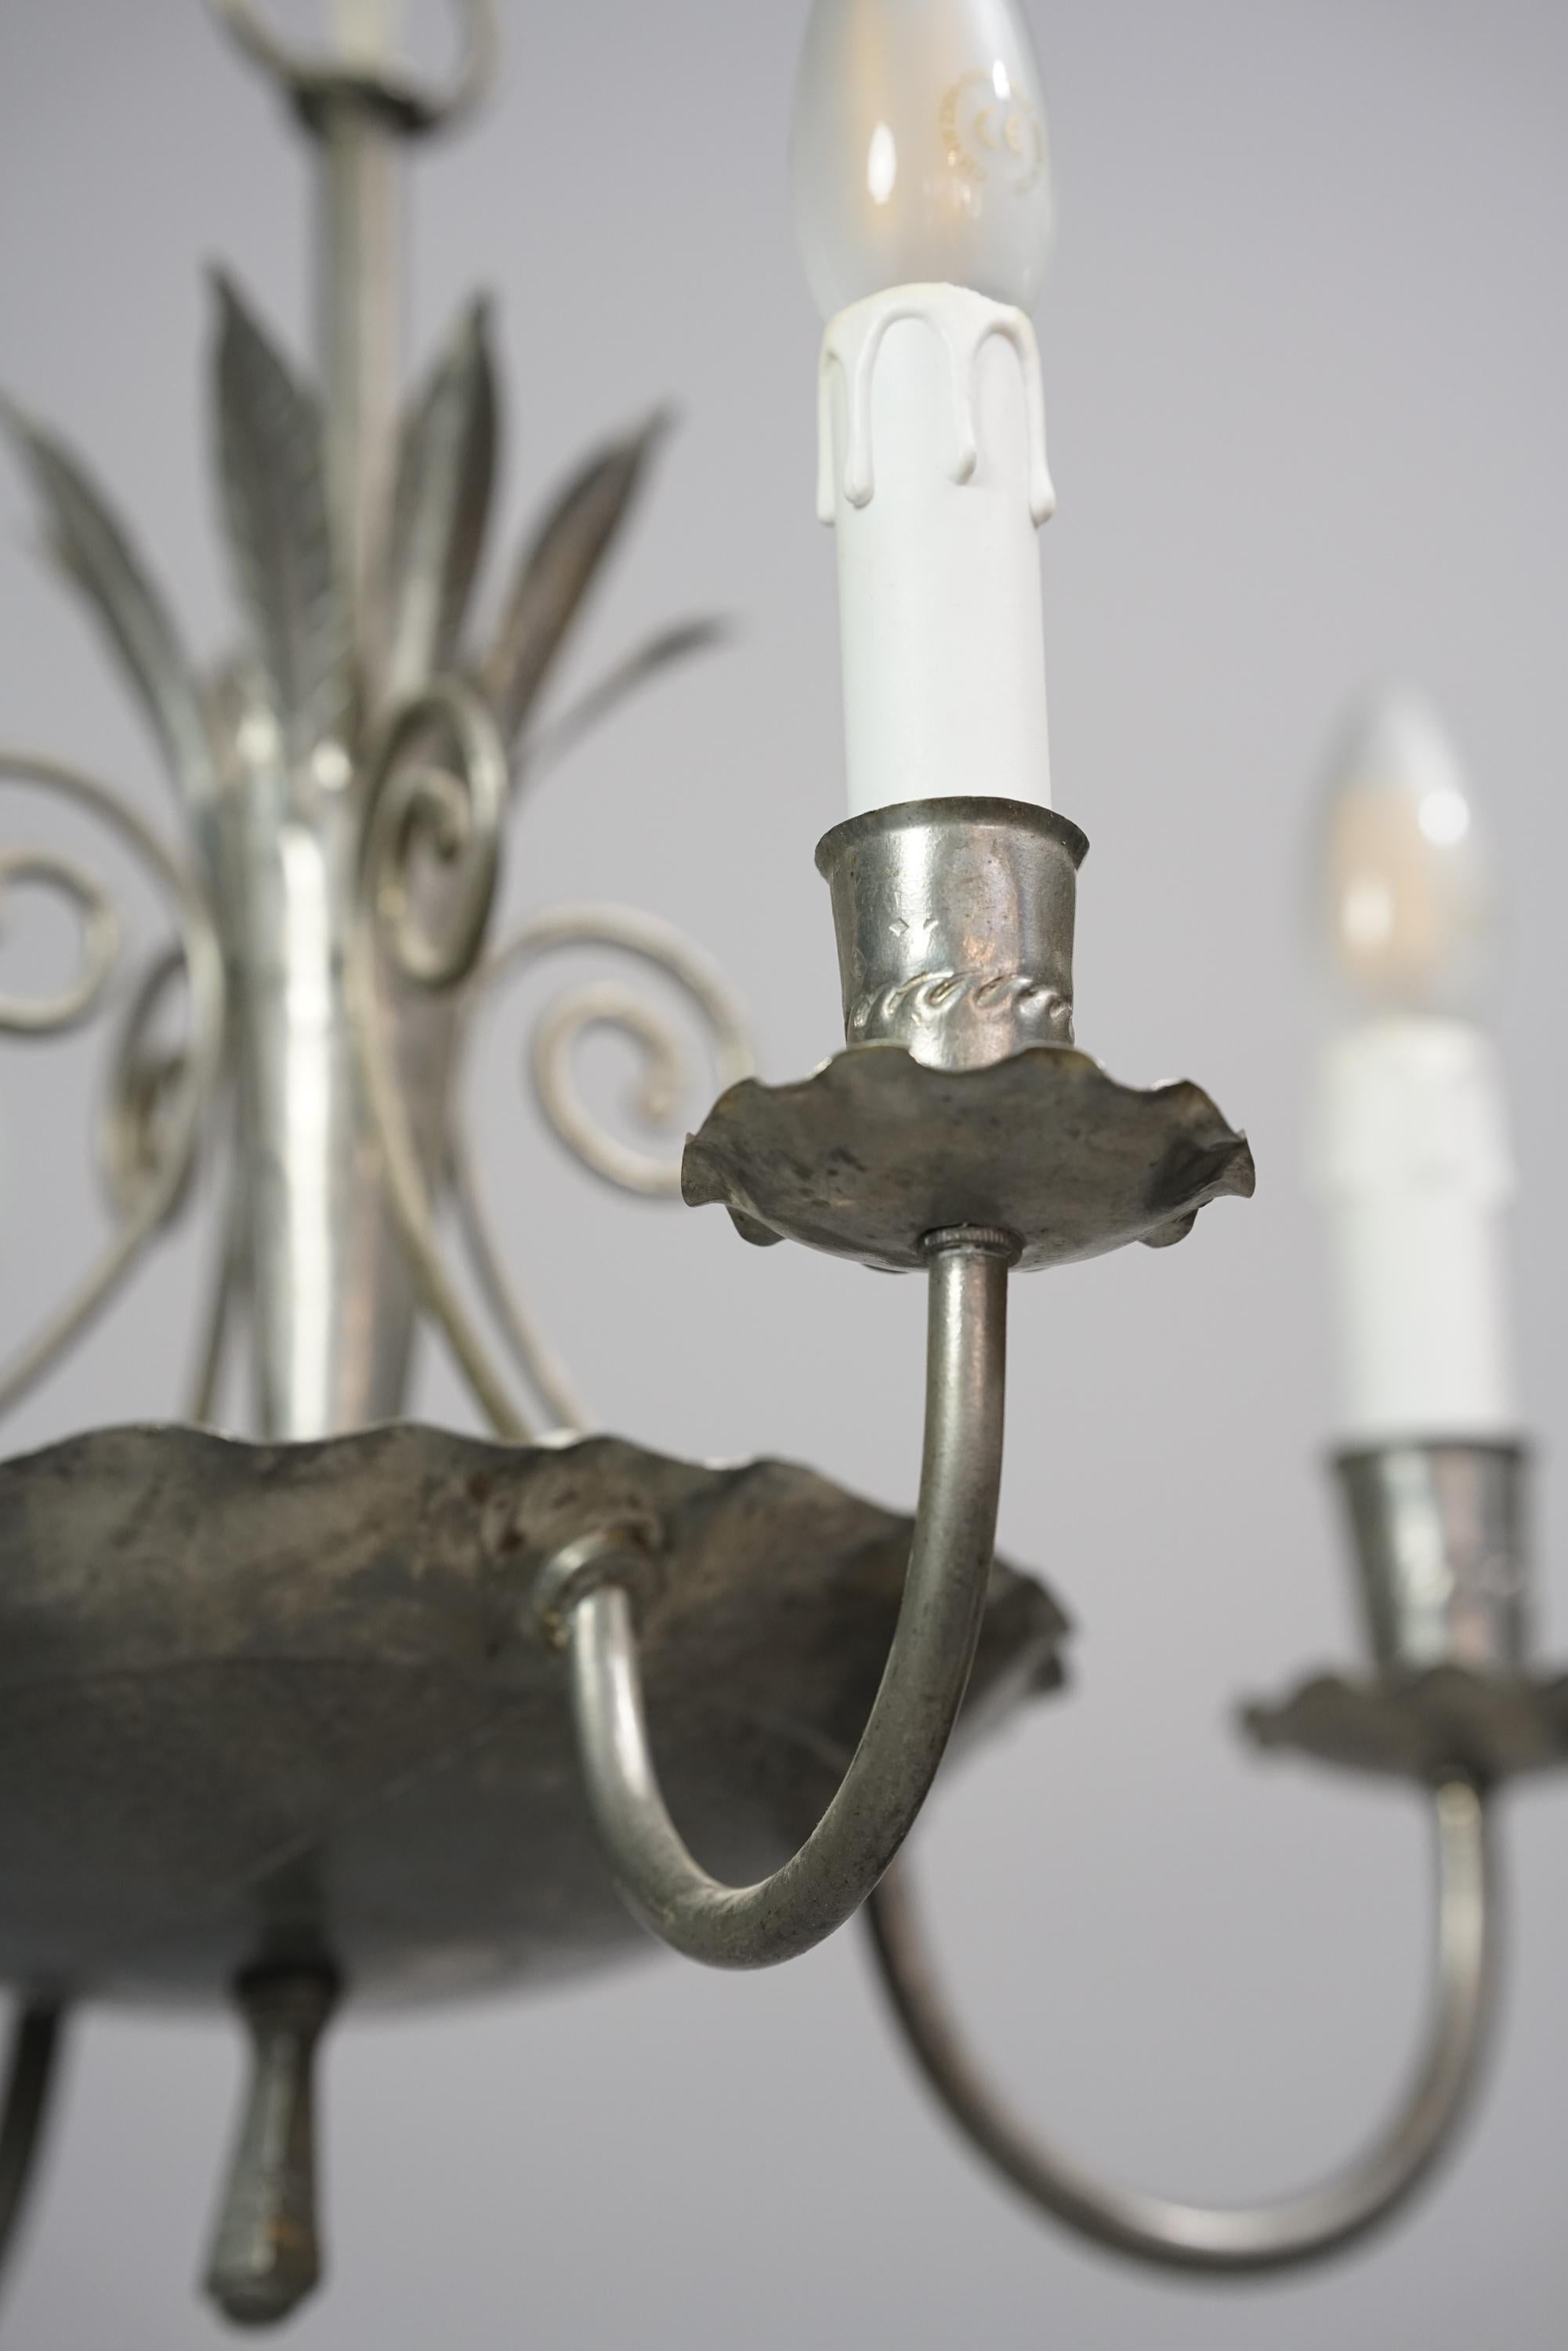 Rare Finnish Iron Chandelier Attributed to Paavo Tynell, 1920s For Sale 4